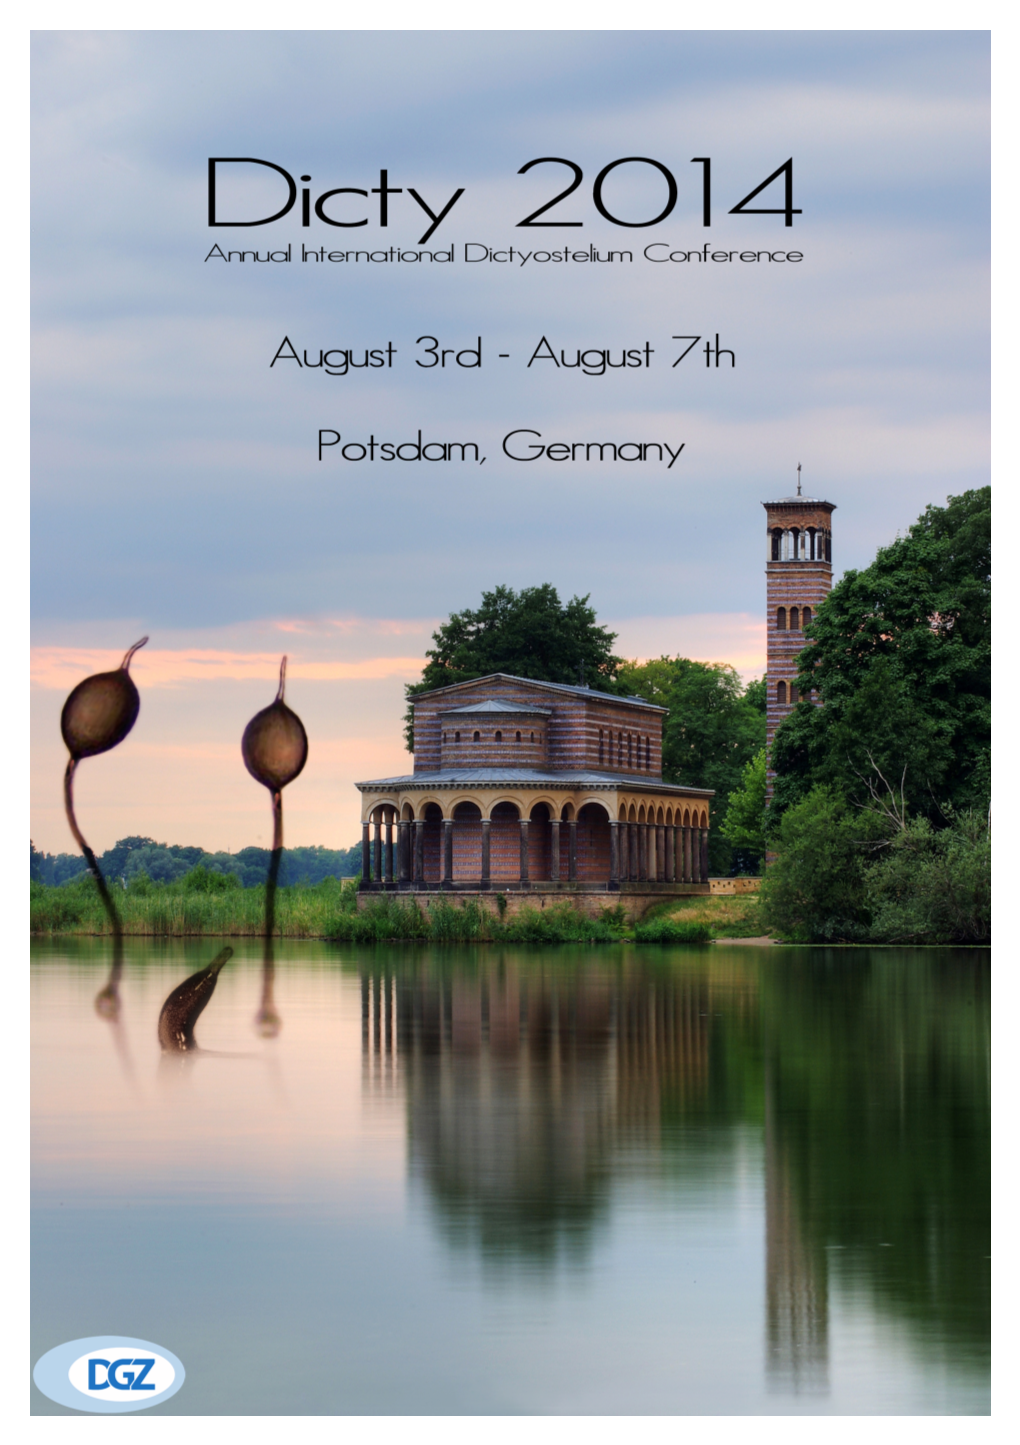 Dicty 2014 Abstract Book (Pdf)